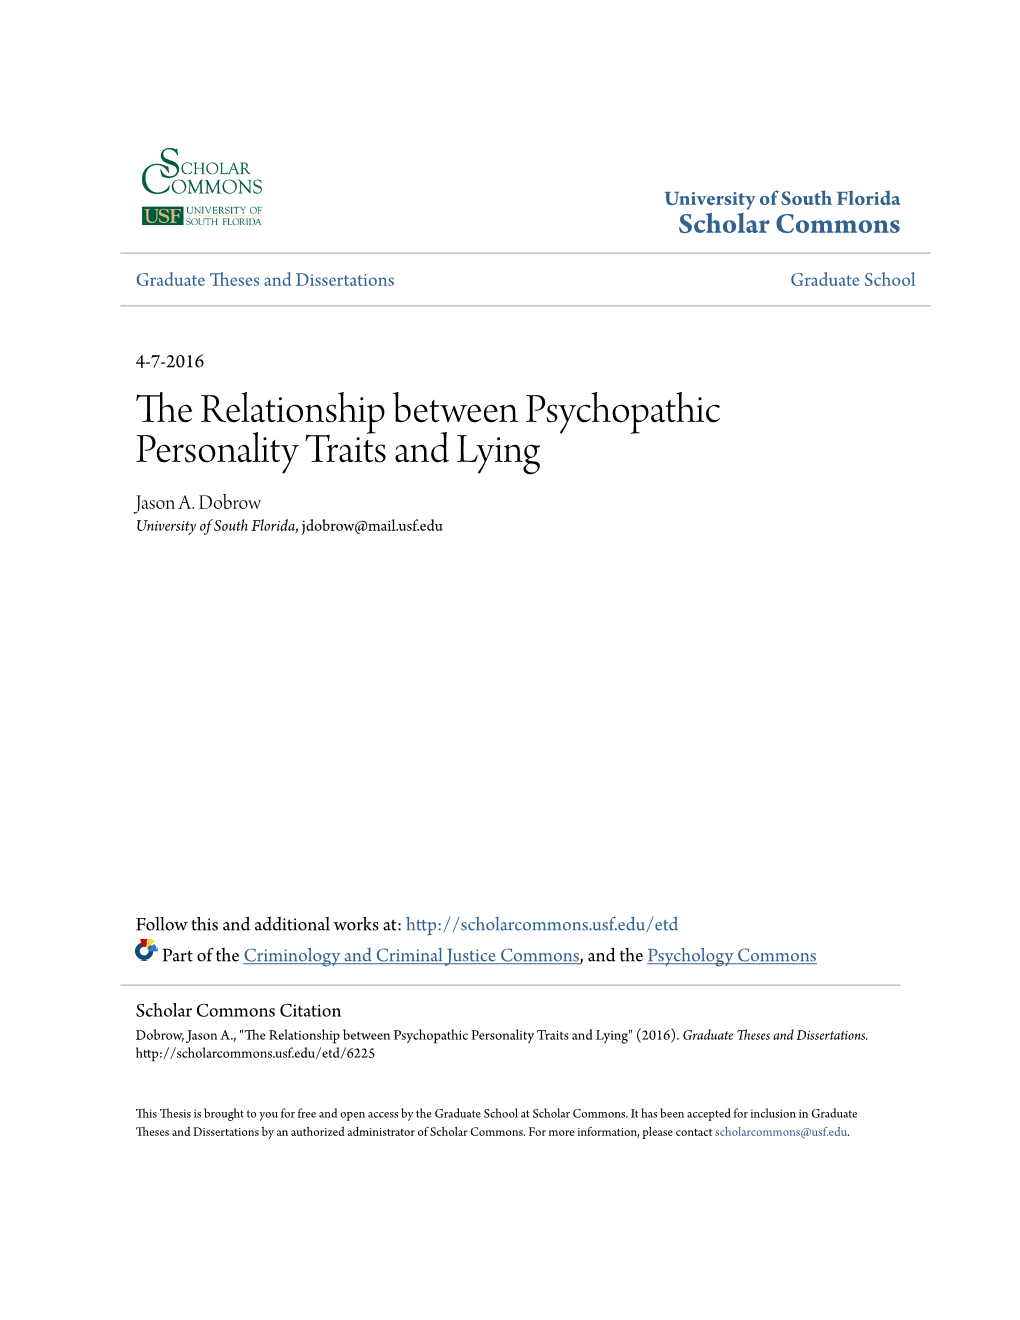 The Relationship Between Psychopathic Personality Traits and Lying Jason A